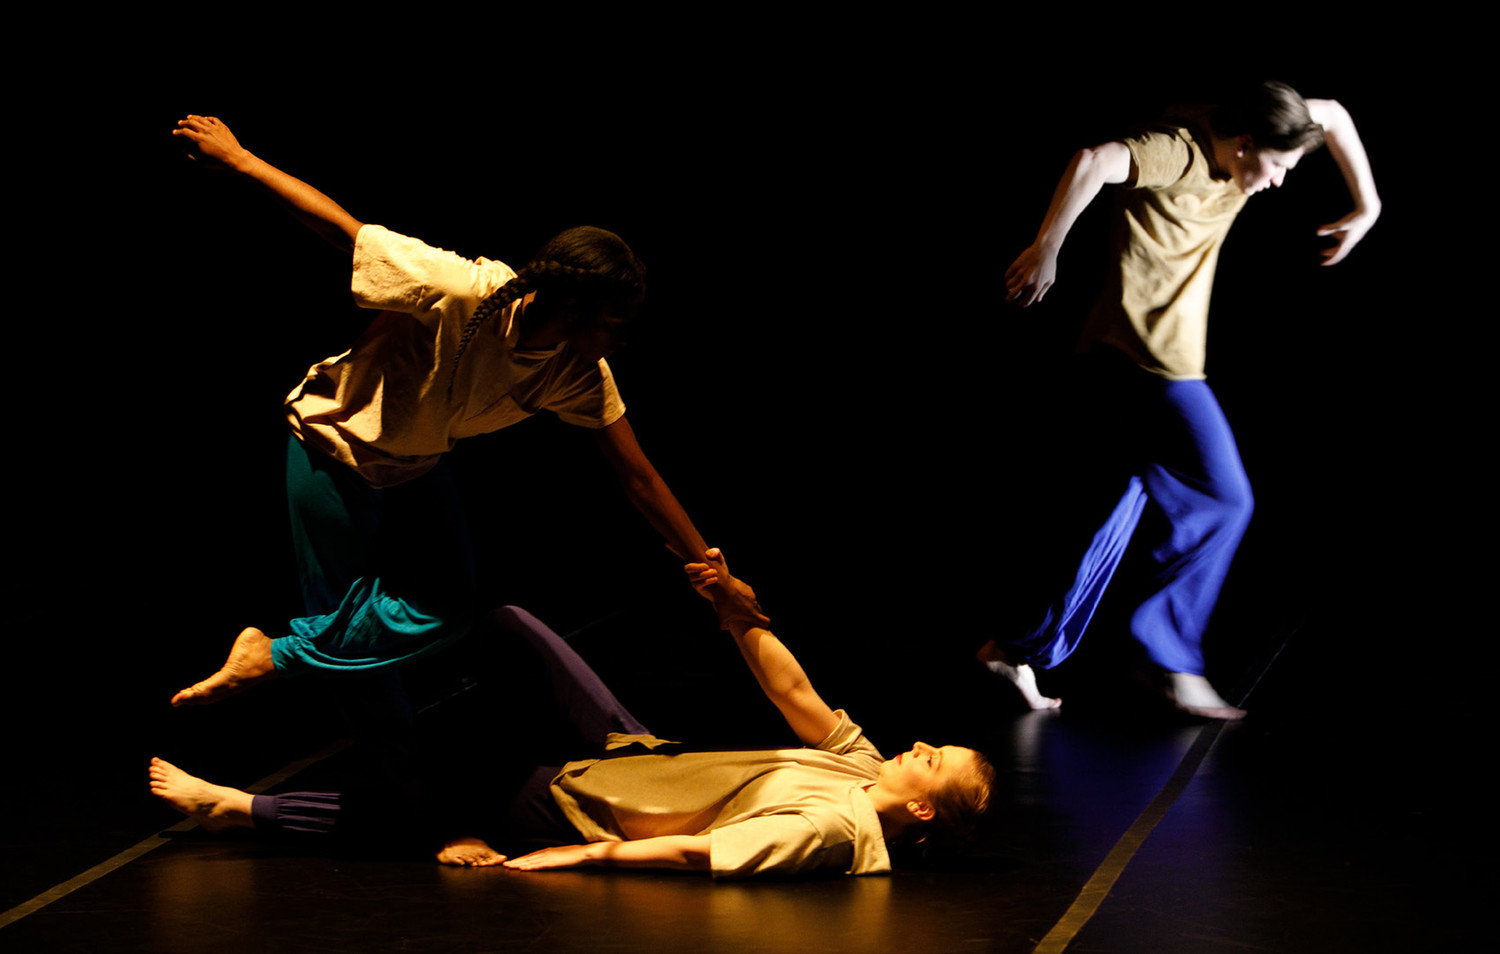 Dance students perform Stony the Road We Trod, choregraphed by André Zachery, Artistic Director of Renegade Performance Group for the Spring Dance Concert, supported in part by a UVA Arts Council Grant.